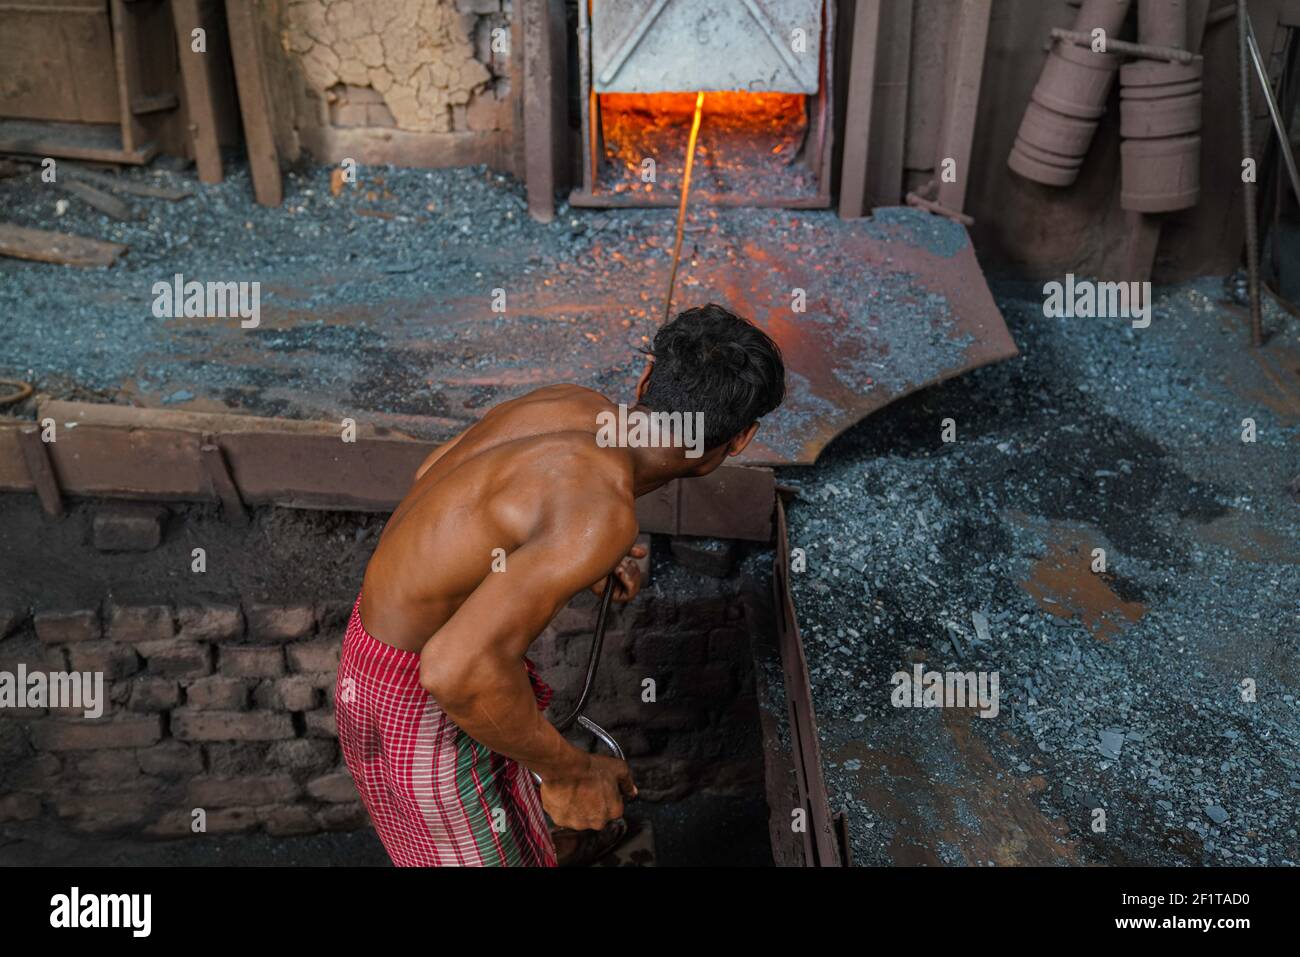 A rolling mill worker seen working in the steel re-rolling mill without proper safety gear or tools in Dhaka, Bangladesh on March 9, 2021. Stock Photo